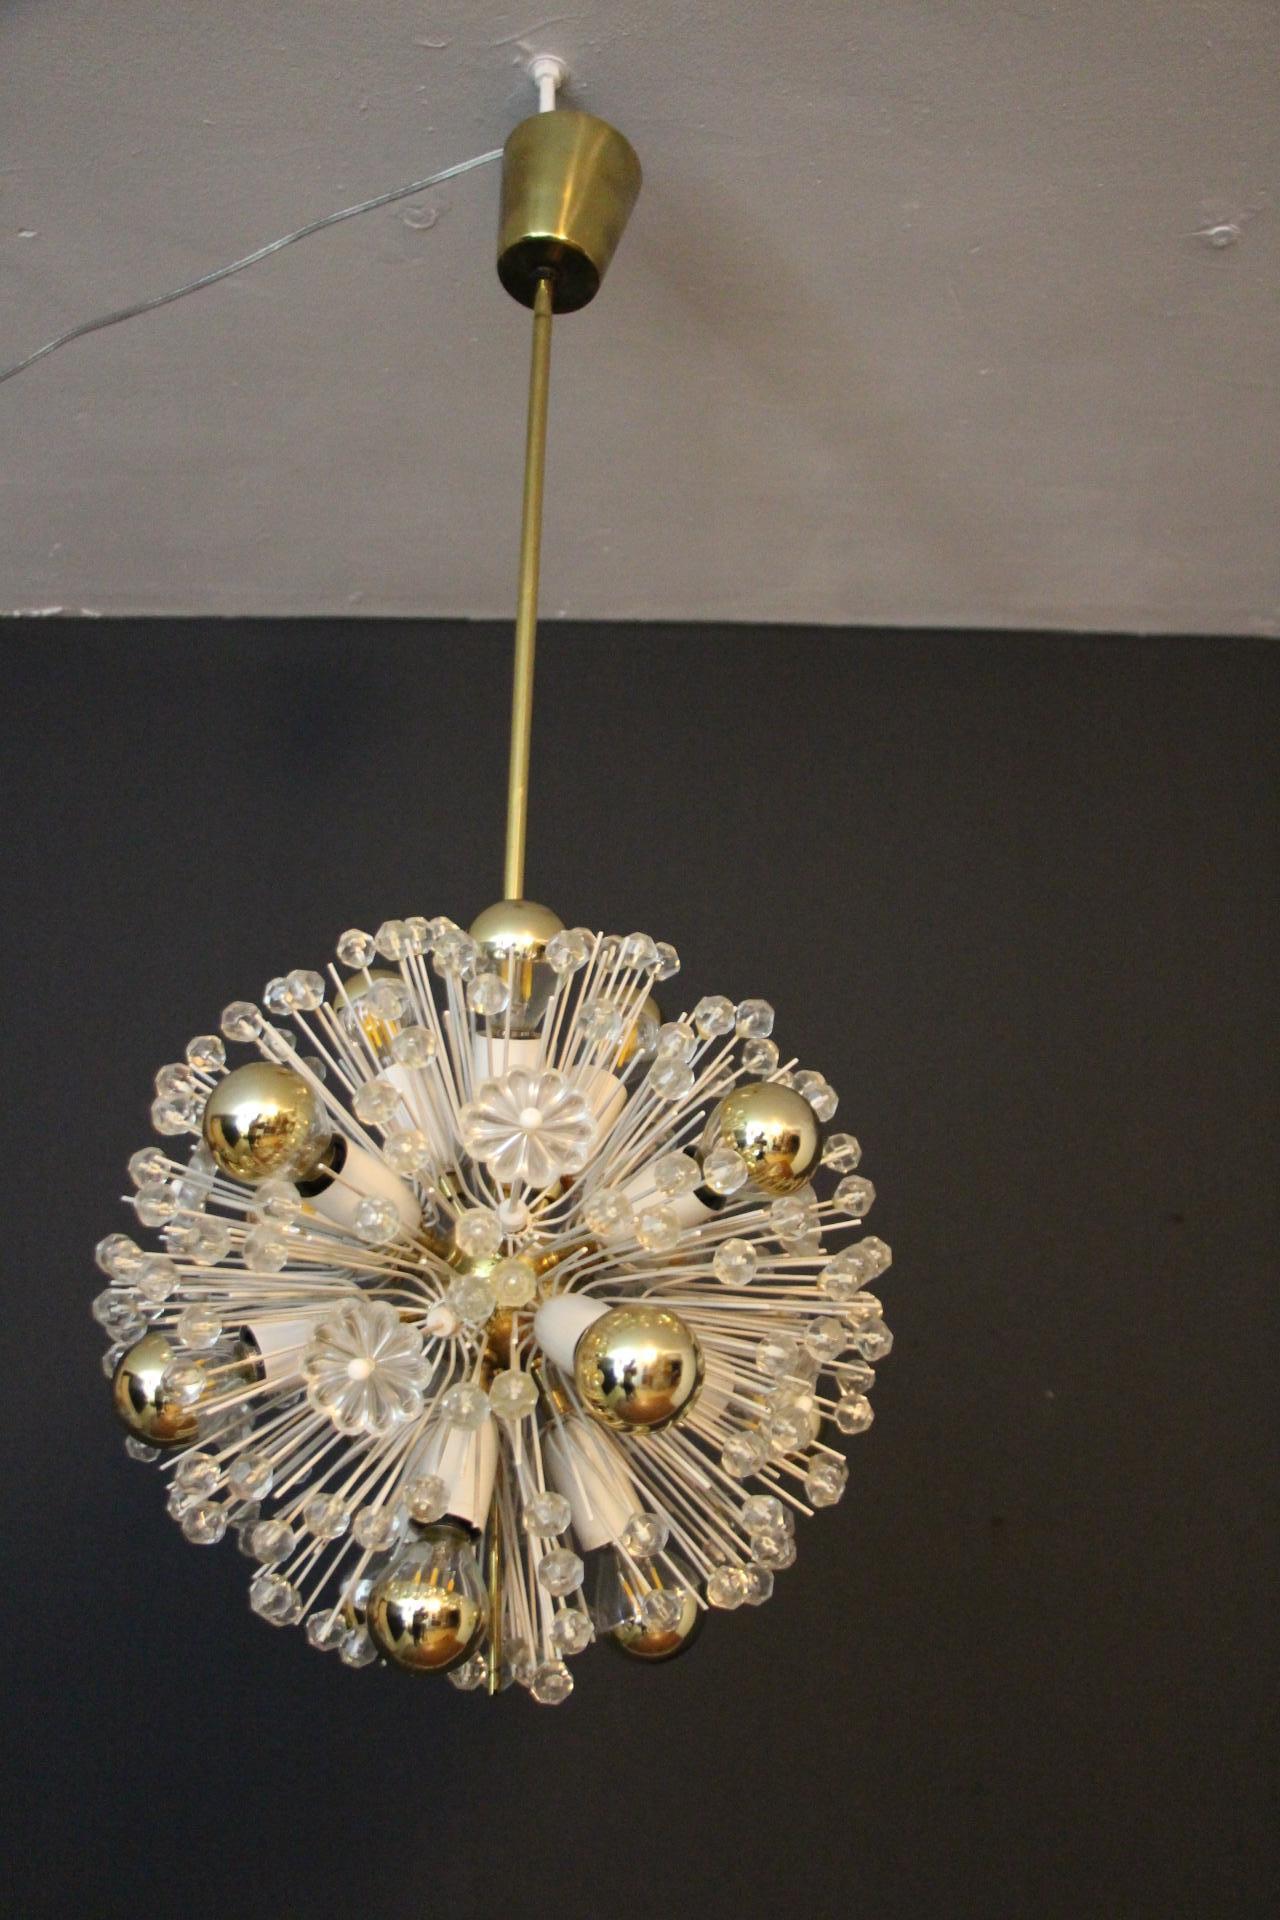 This spectacular Sputnik Chandelier looks like a flowers explosion.It features a multitude of brass rods ending with bulbs or clear crystal flowers. Each rod is directly fixed on its polished brass central sphere . Its rods are ending with delicate